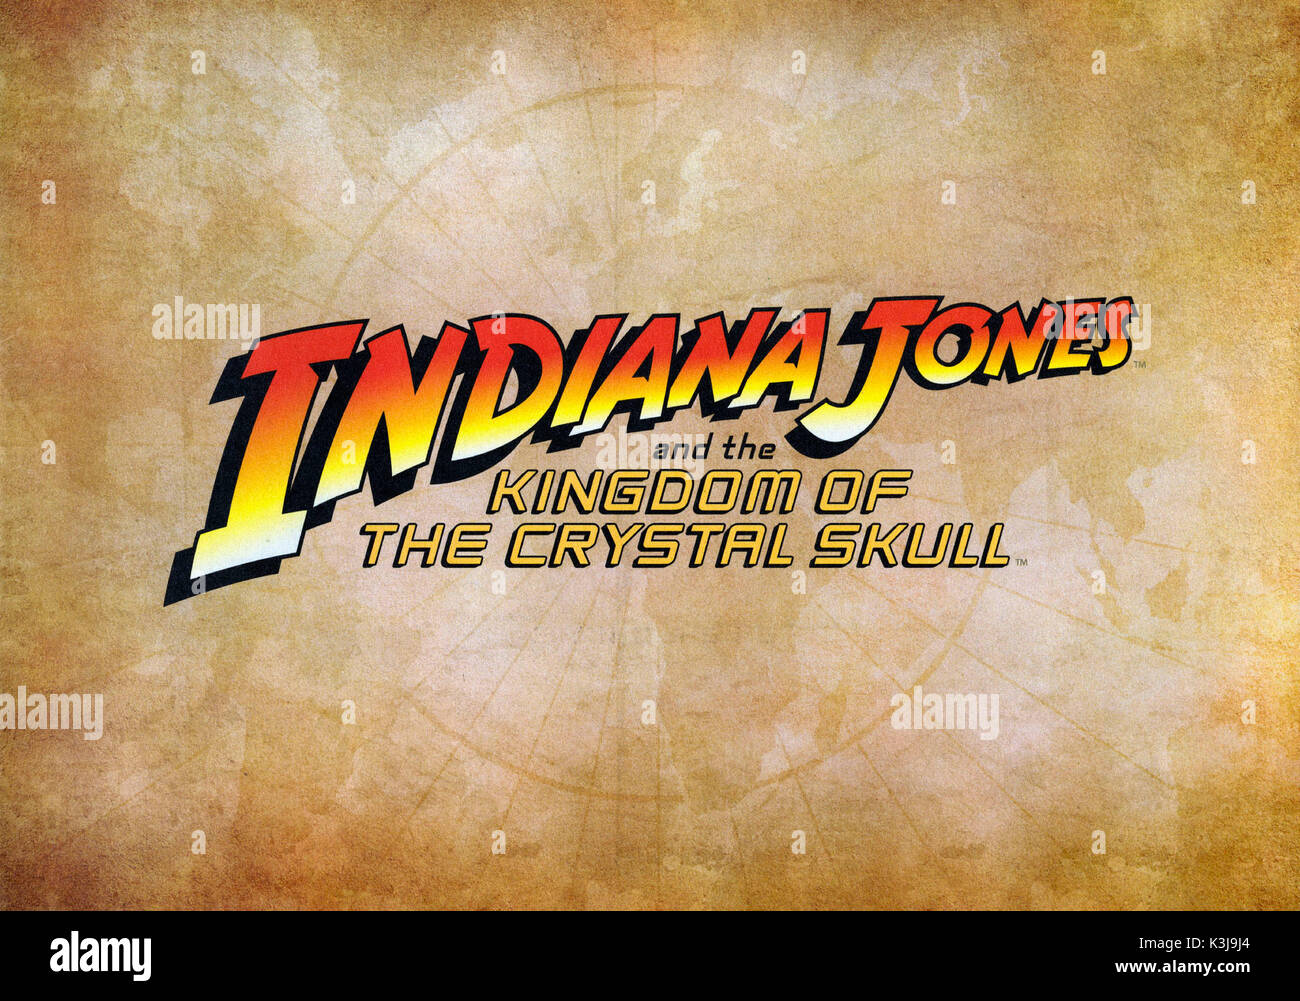 INDIANA JONES AND THE KINGDOM OF THE CRYSTAL SKULL      Date: 2008 Stock Photo